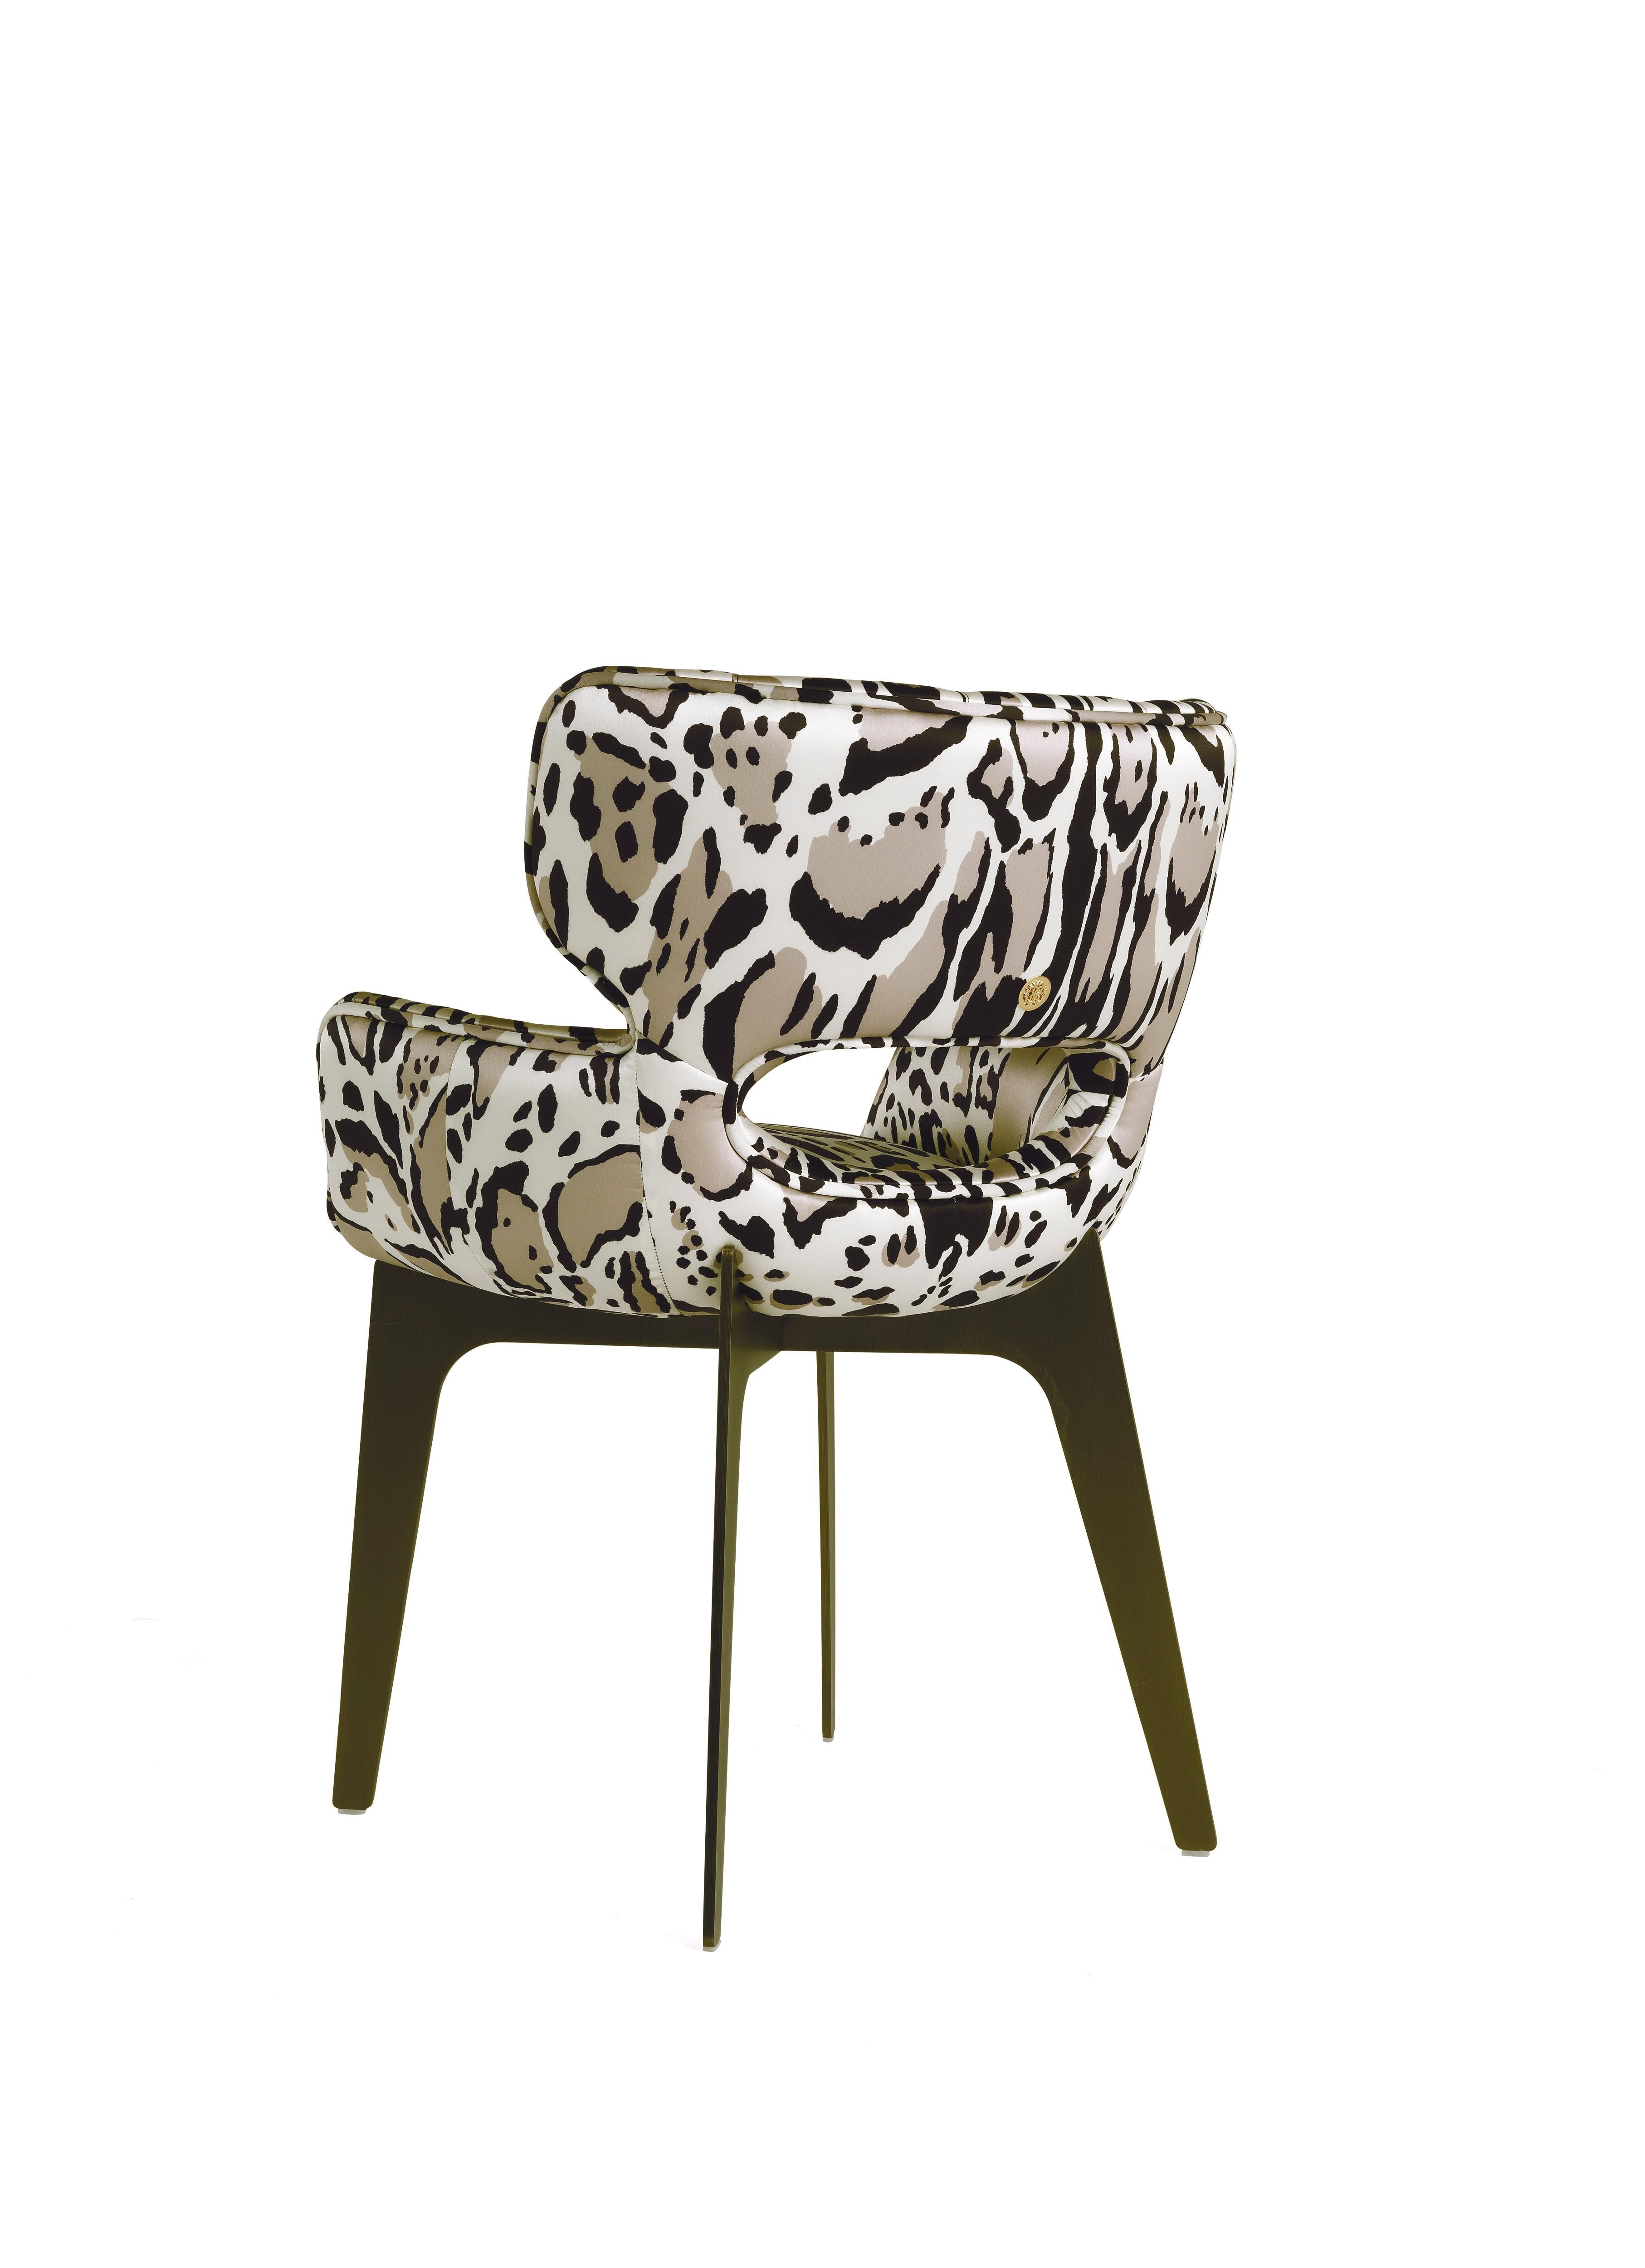 Modern 21st Century Maclaine Chair in Fabric by Roberto Cavalli Home Interiors For Sale